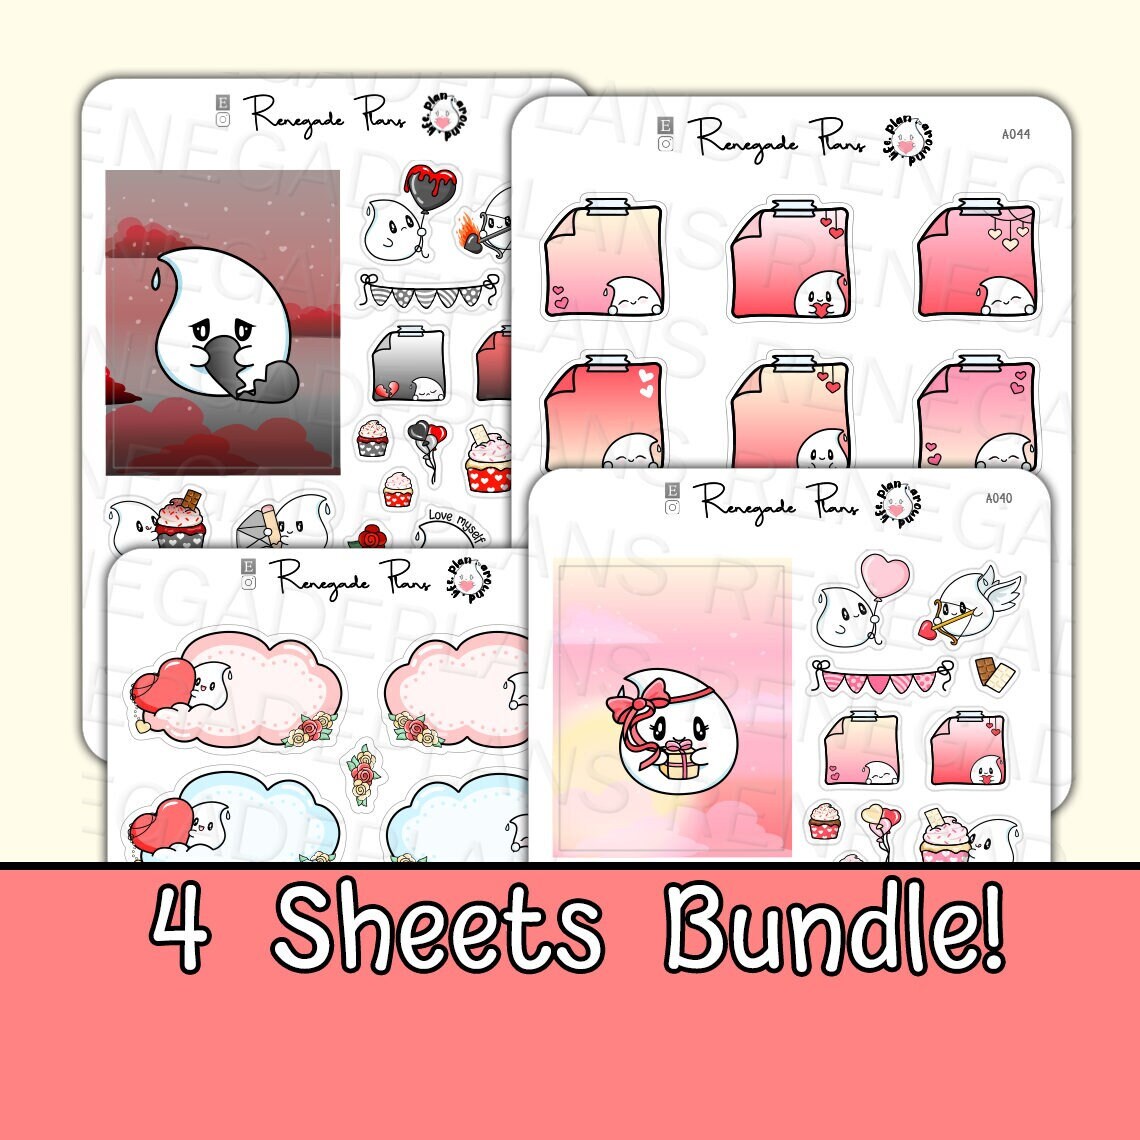 Bundle of Love stickers, daily kit, cute valentines stickers, happy planner stickers, bullet Journal Scrapbook, Hand Drawn Character sticker